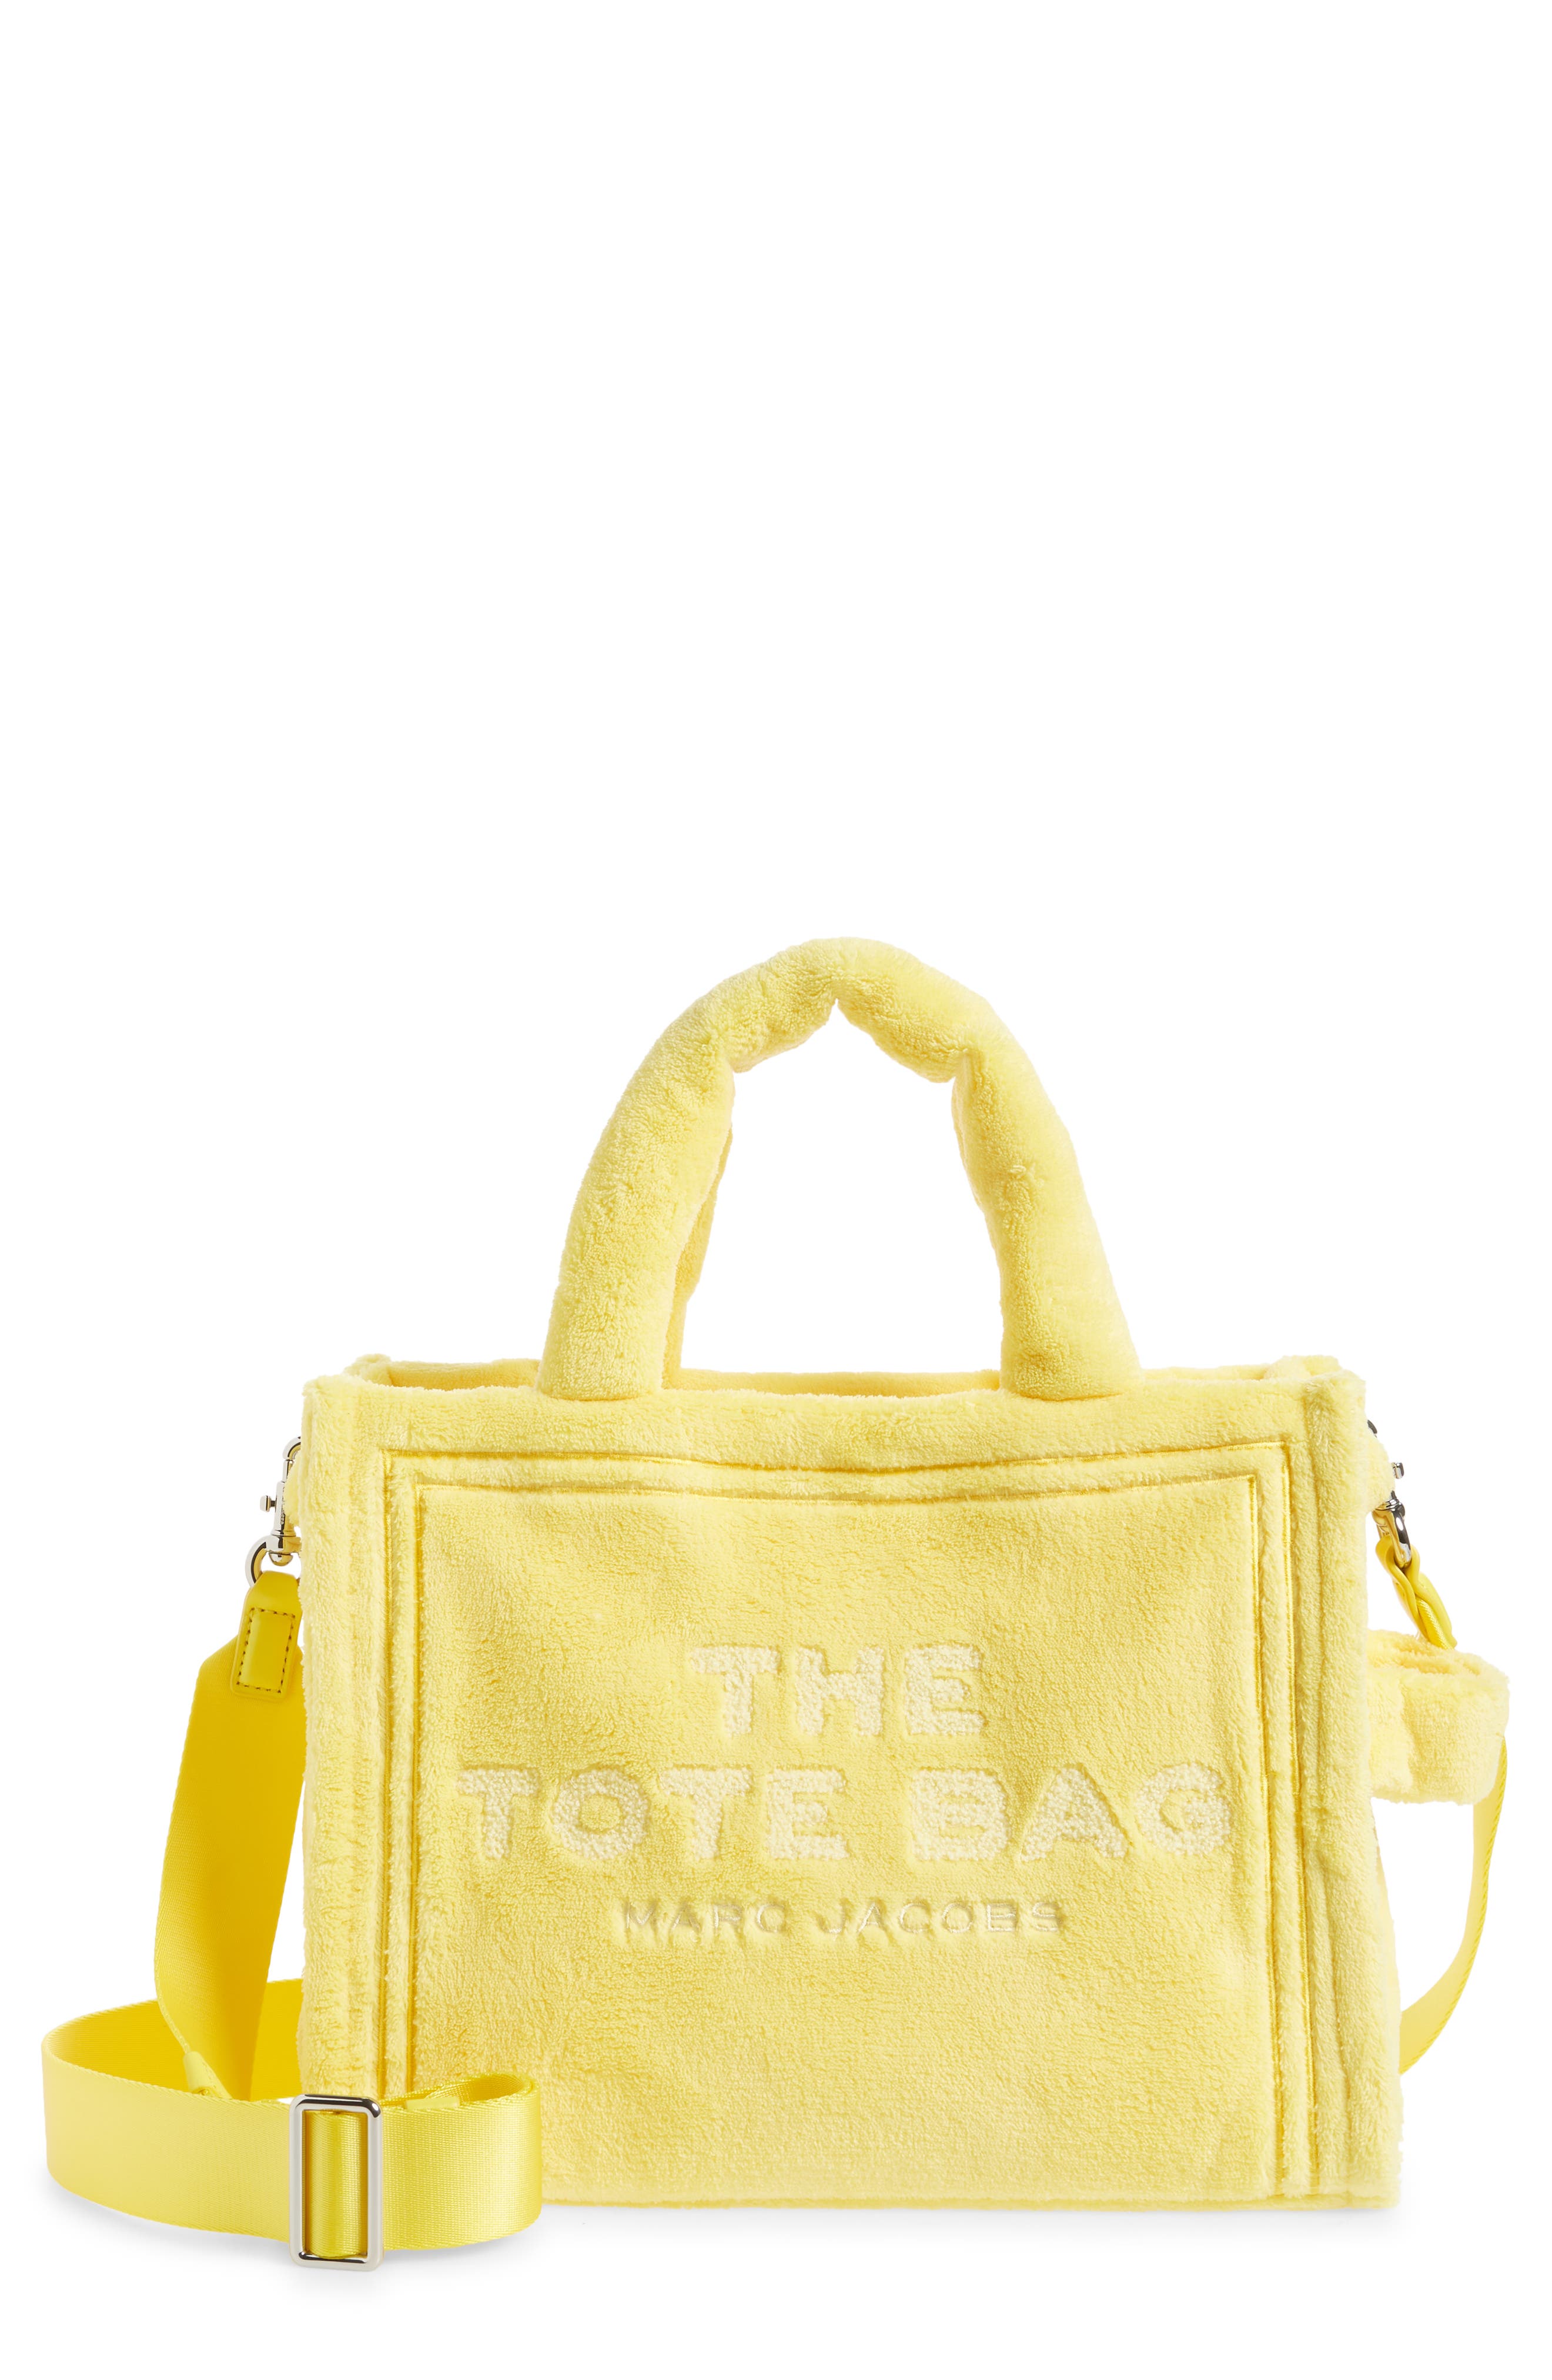 Marc Jacobs The Small Traveler Terry Tote in Yellow